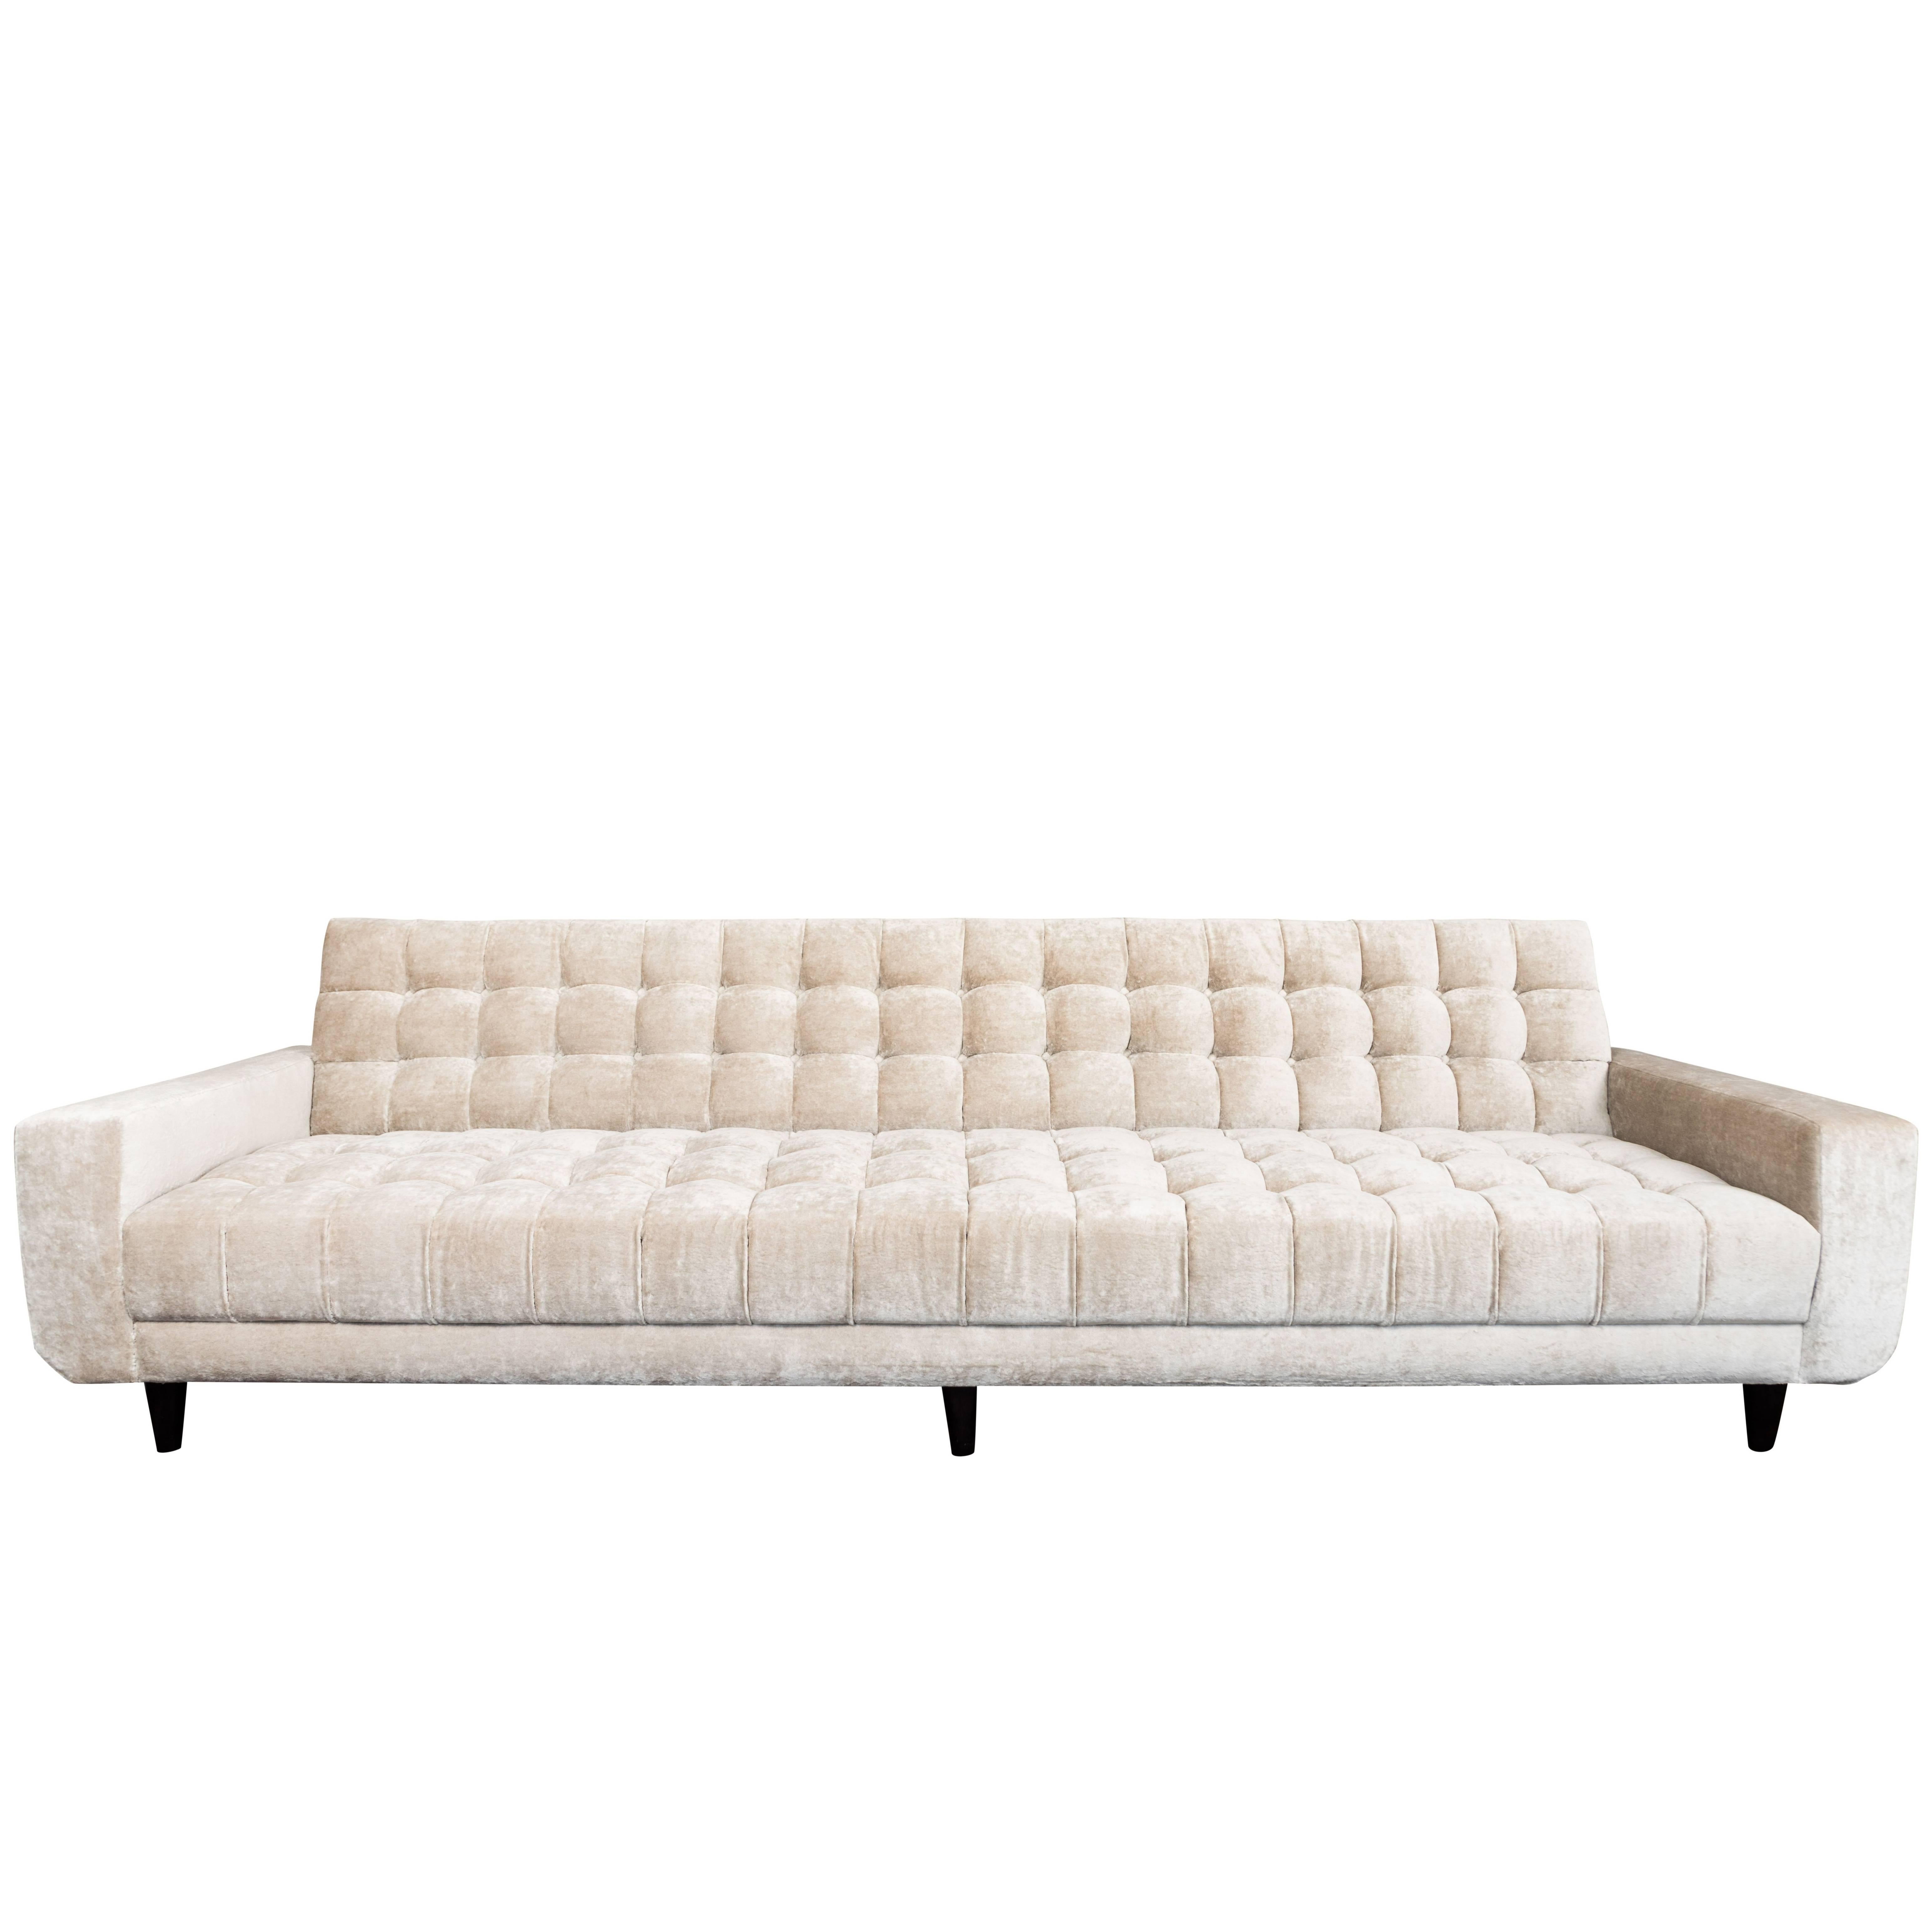 Beautiful Biscuit Tufted Ledge Back Sofa by William Haines